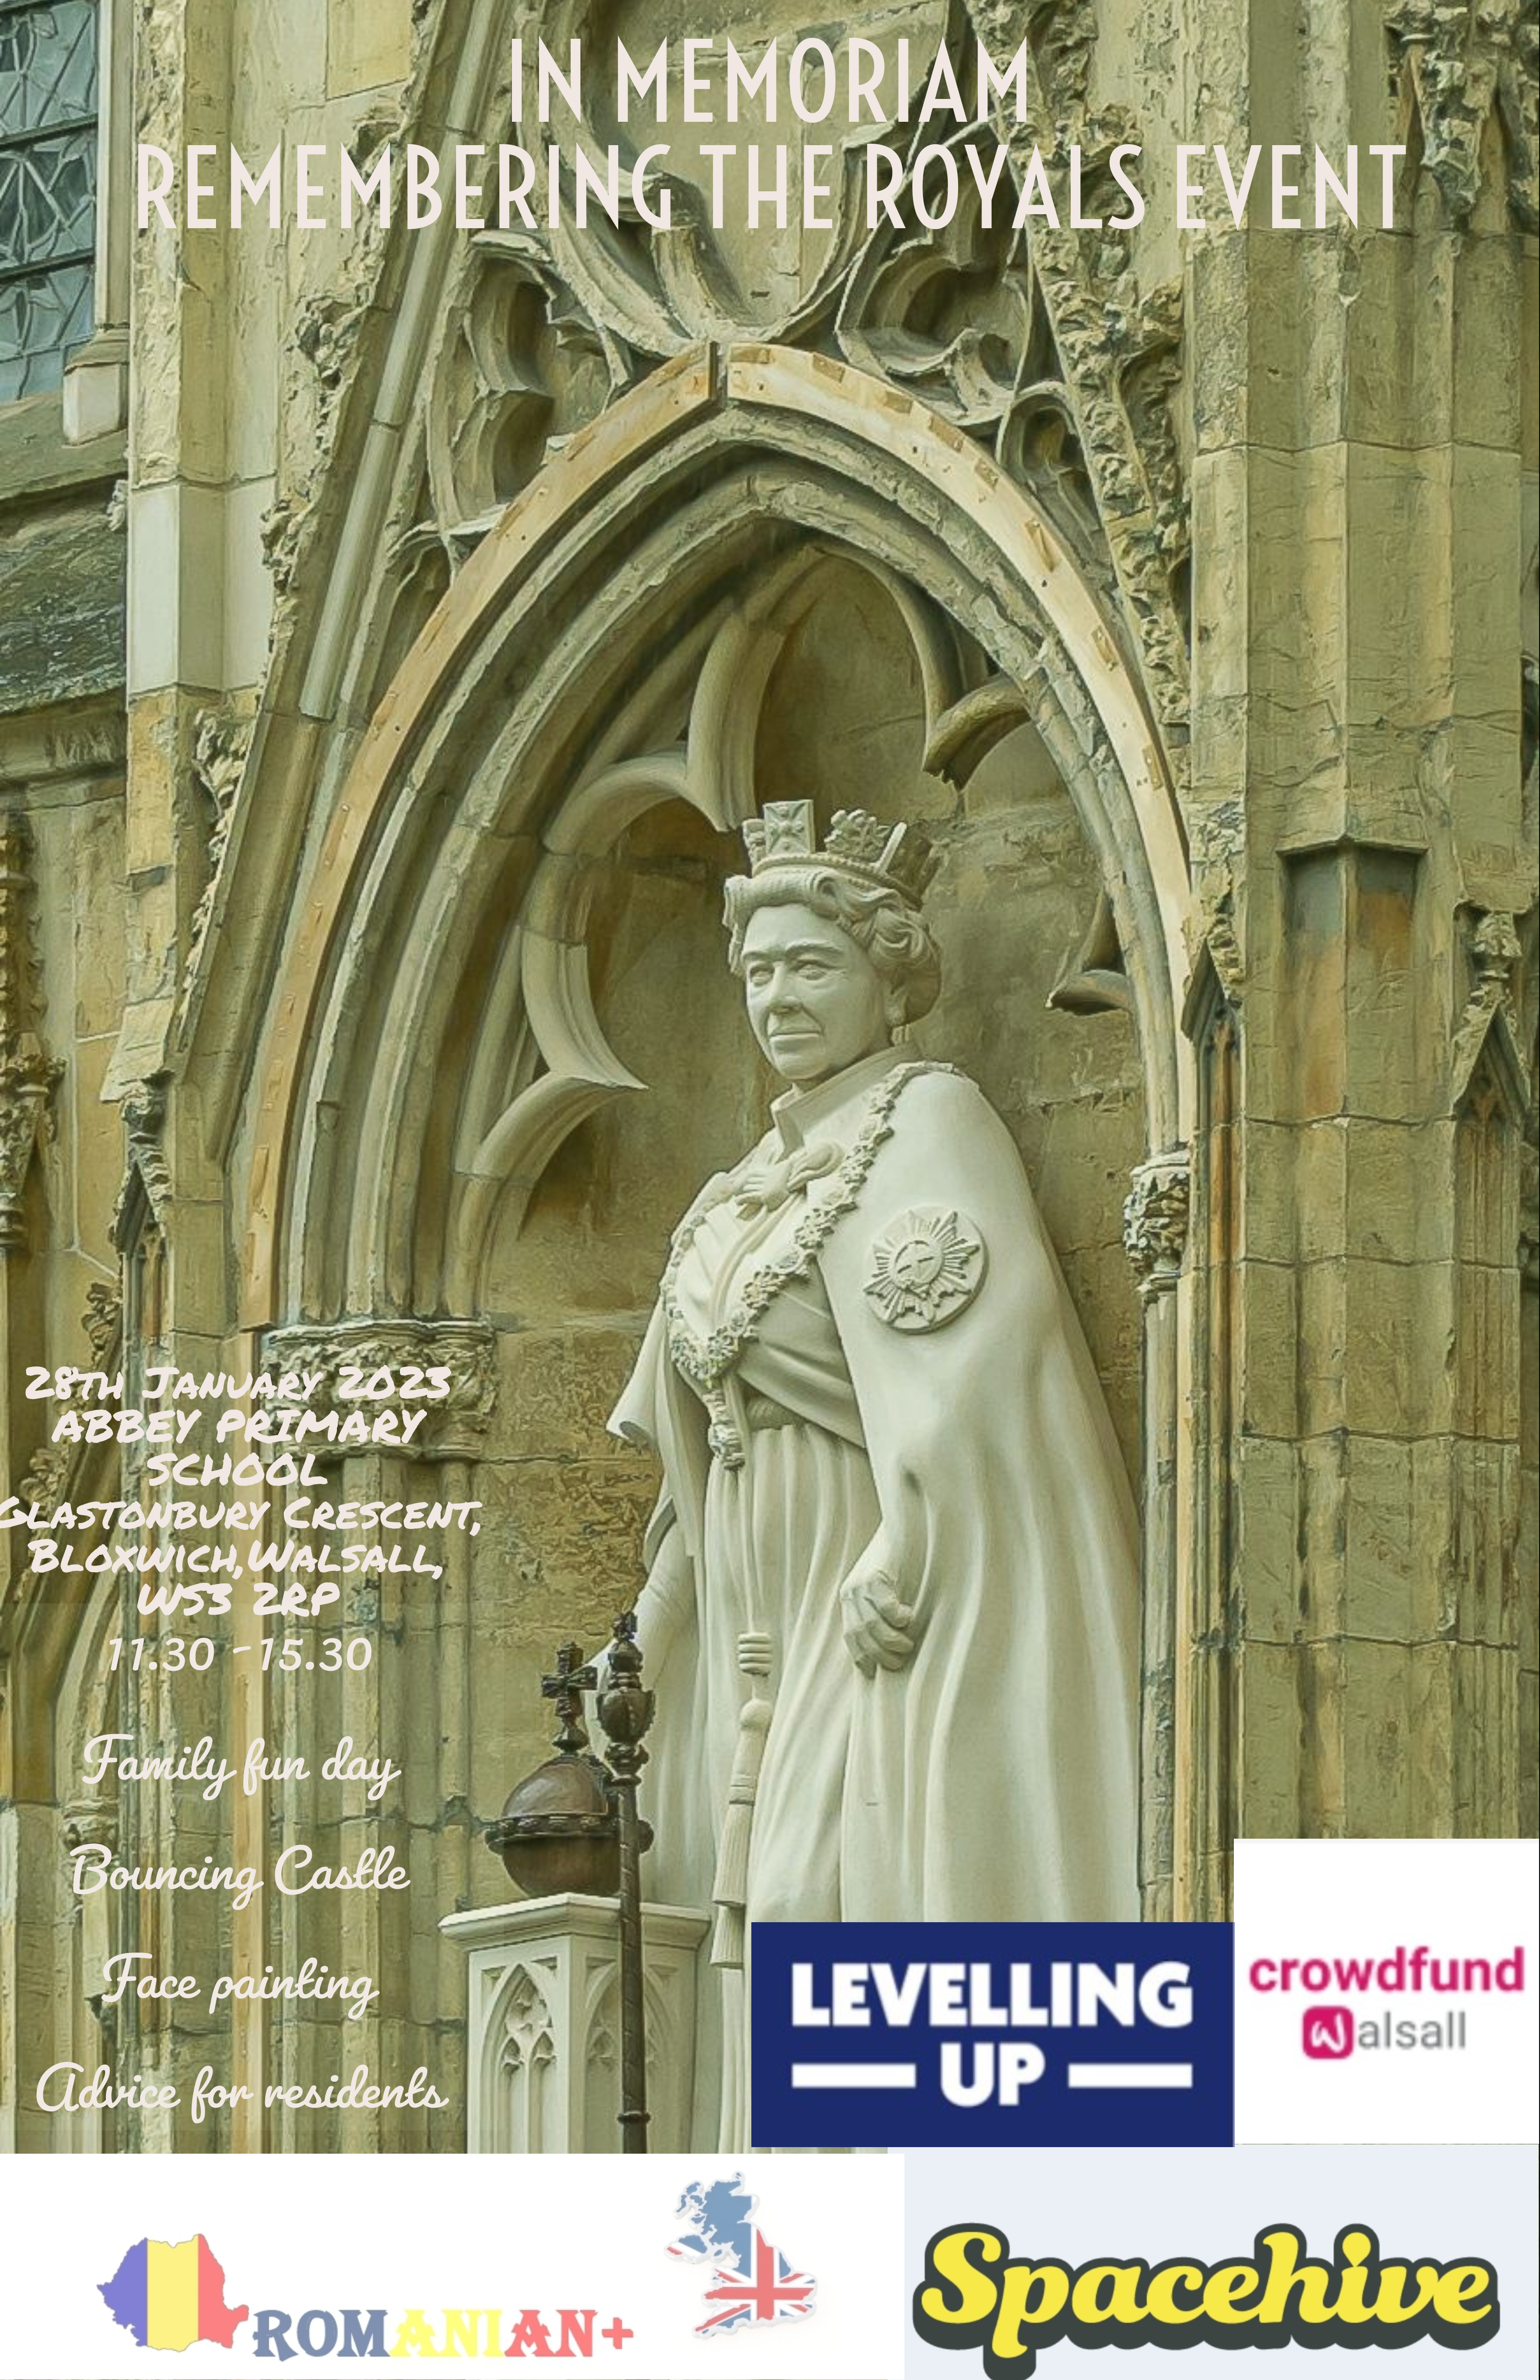 A flyer depicting a photo of a statue of The Queen. The flyer reads In Memorium Remembering the Royals Event